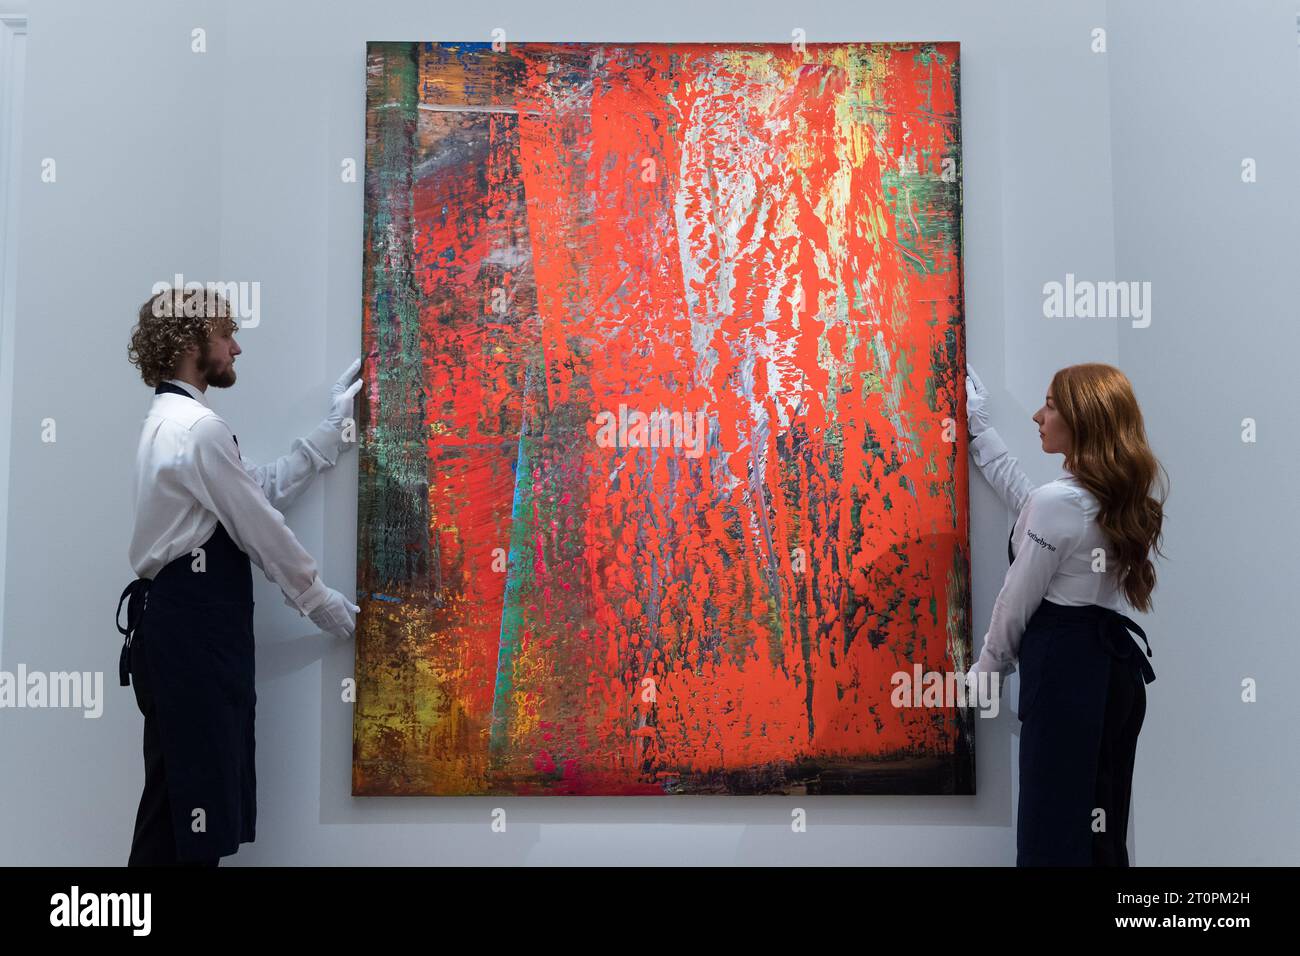 London, UK. 06th Oct, 2023. LONDON, UNITED KINGDOM - OCTOBER 06, 2023: Gallery staff members hold a painting titled ‘Abstraktes Bild' by Gerhard Richter, estimate £16-24 Million, during a photocall at Sotheby's auction house showcasing the highlights of Frieze Week Sales in London, United Kingdom on October 06, 2023. The artworks will be on view at Sotheby's auction house between 7 and 11 October before being offered during The Now and Contemporary Evening auctions on October 12. (Photo by WIktor Szymanowicz/NurPhoto) Credit: NurPhoto SRL/Alamy Live News Stock Photo